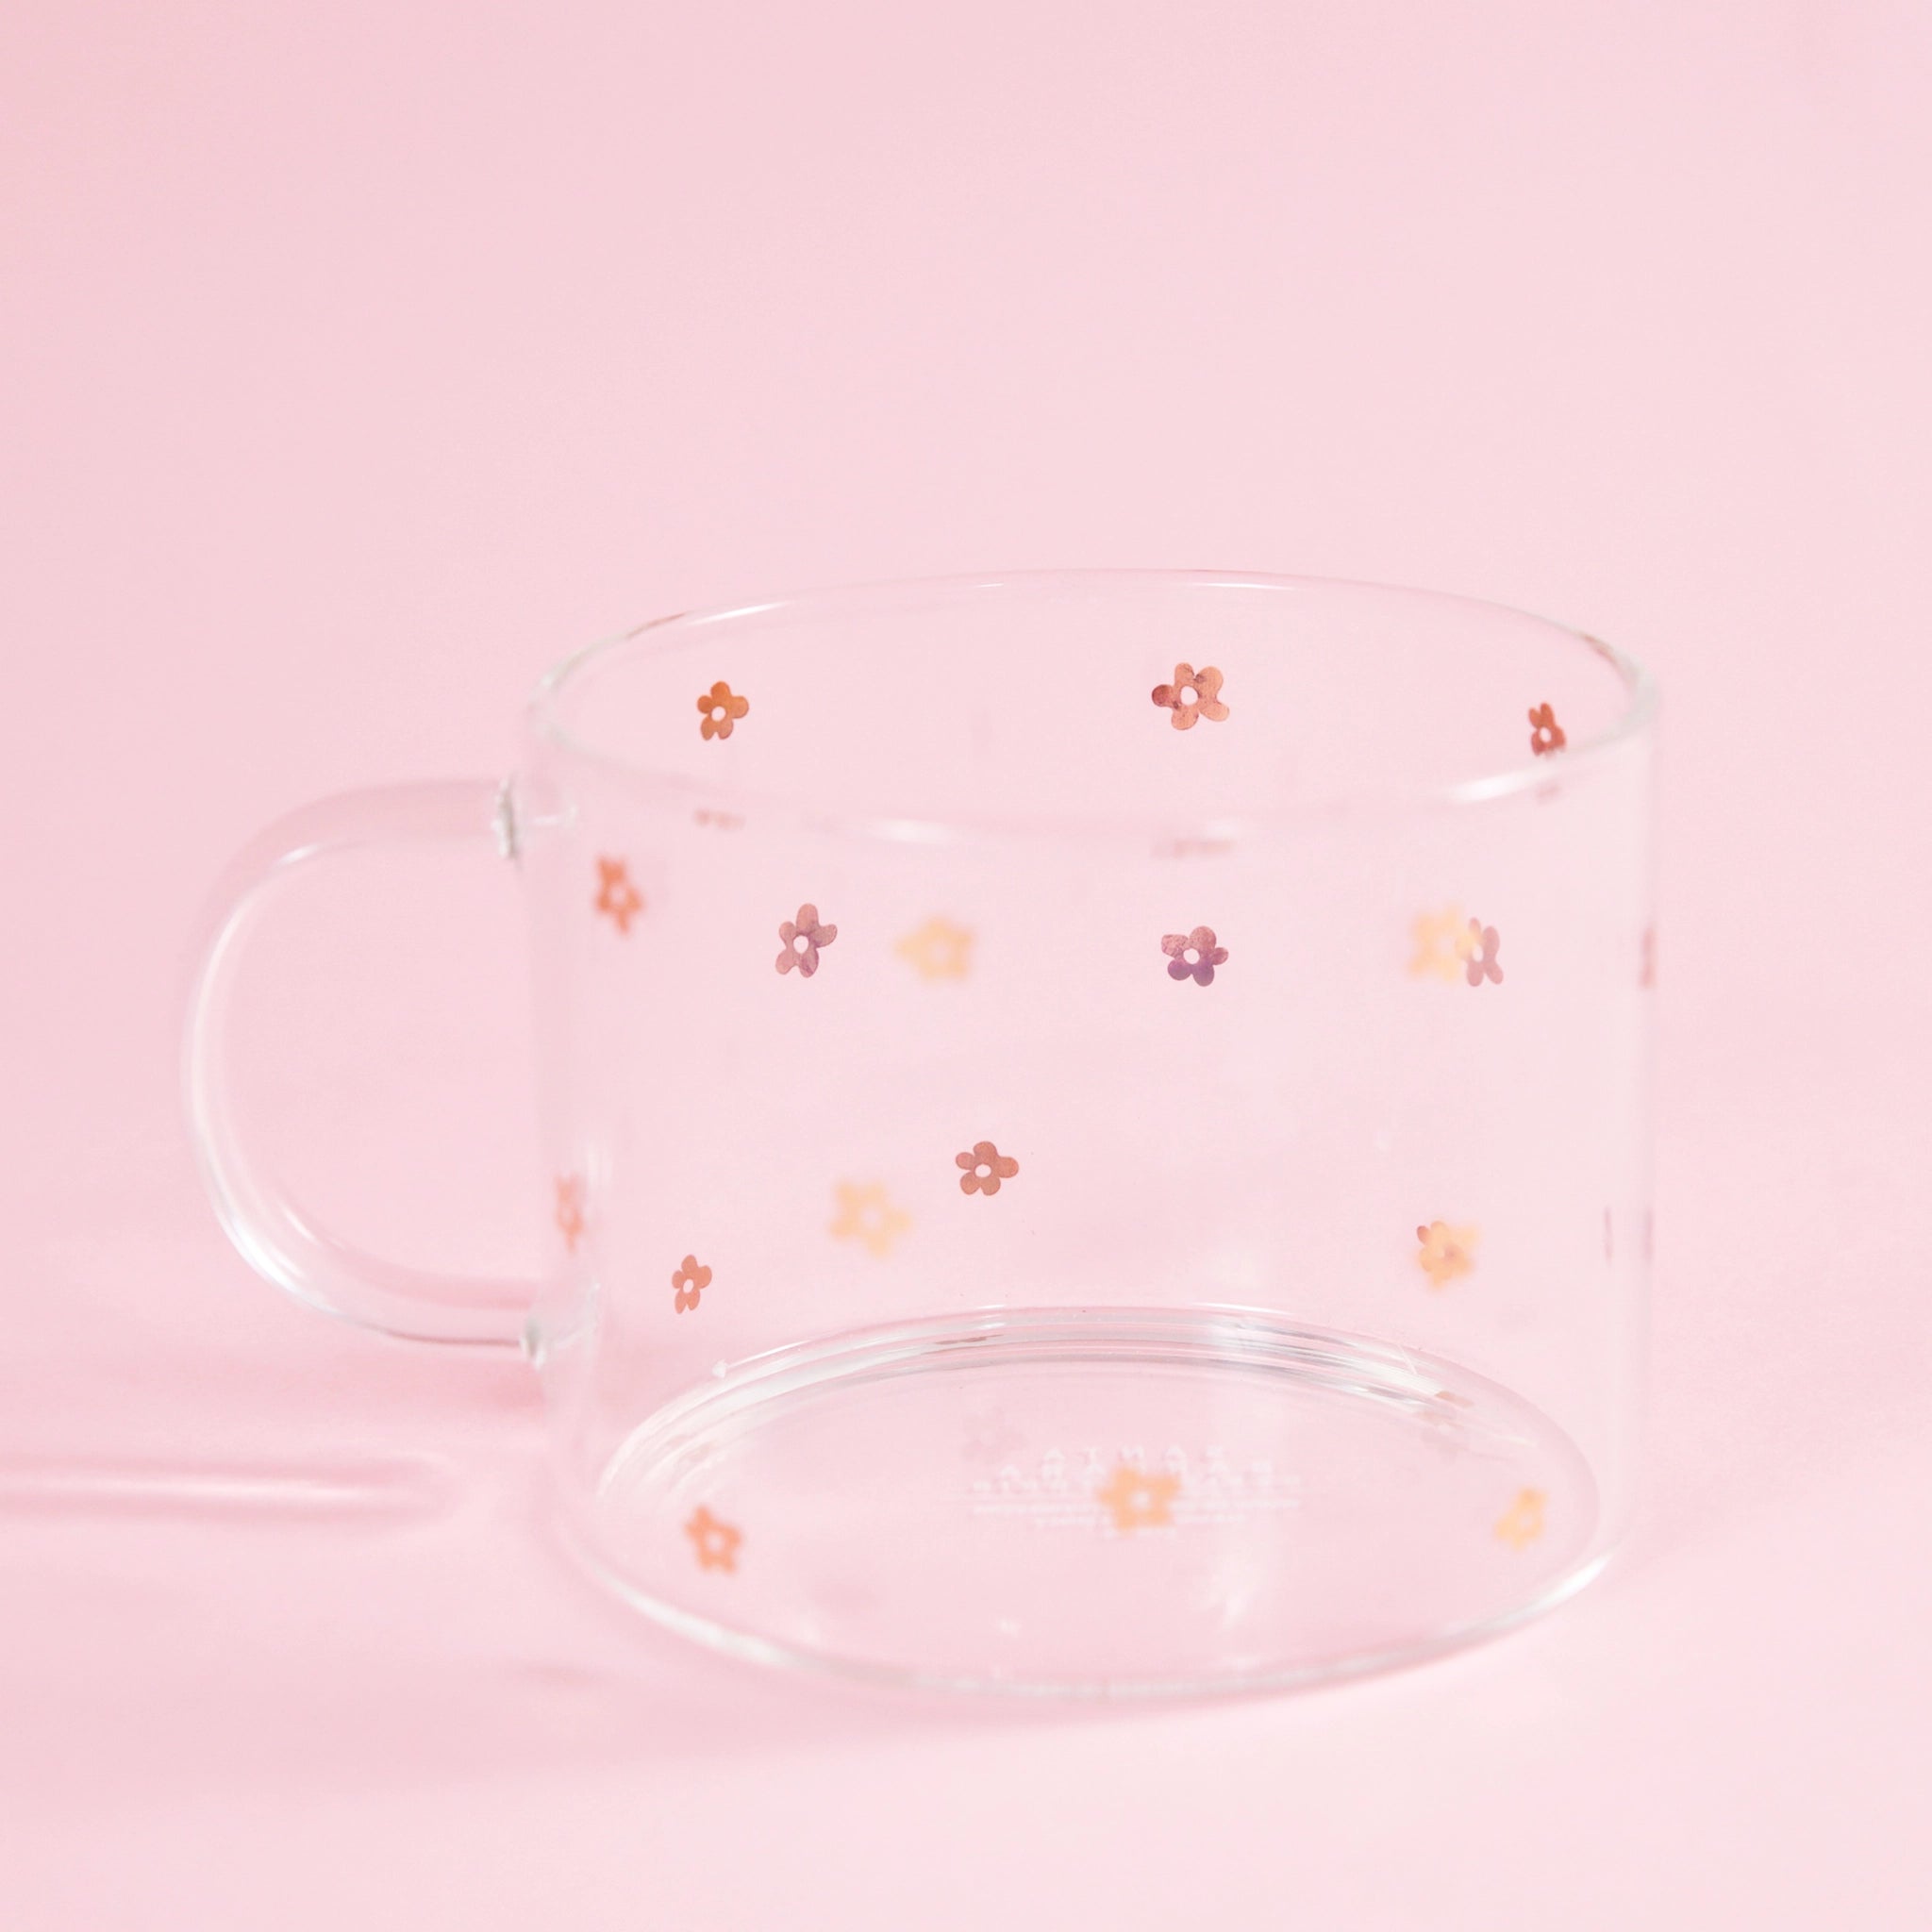 On a light pink background is a clear glass mug with small gold daisy design all over.